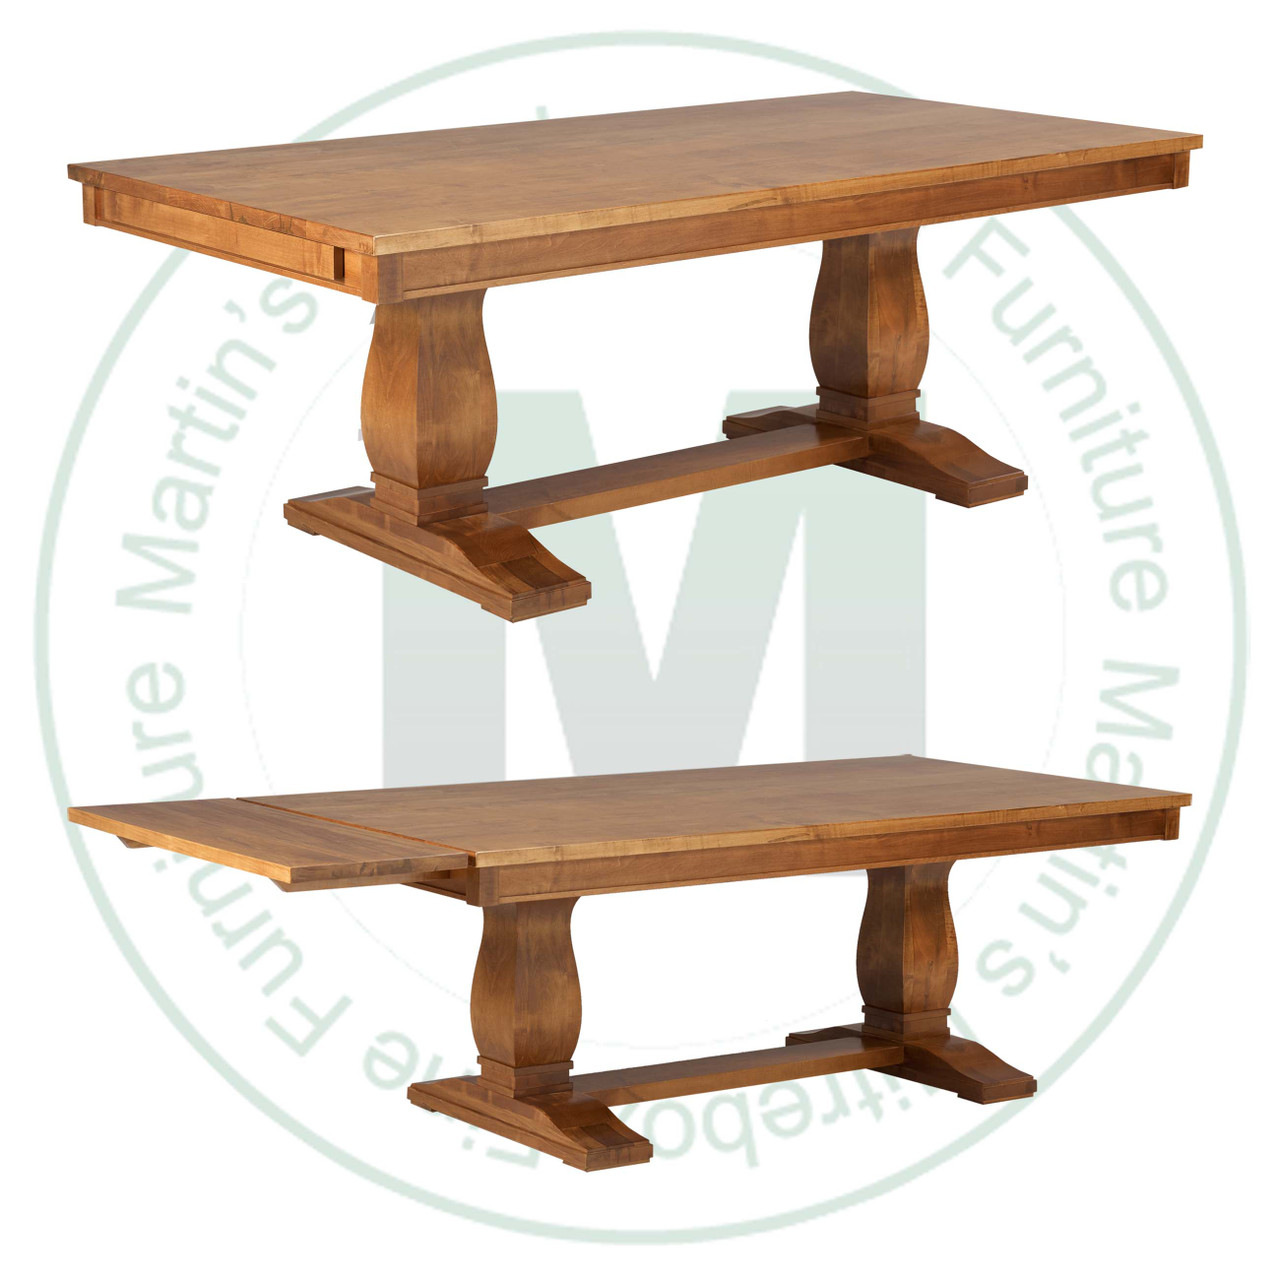 Maple Madrid Solid Top Double Pedestal Table 48''D x 84''W x 30''H With 2 - 16'' Leaves On End Table Has 1.25'' Thick Top